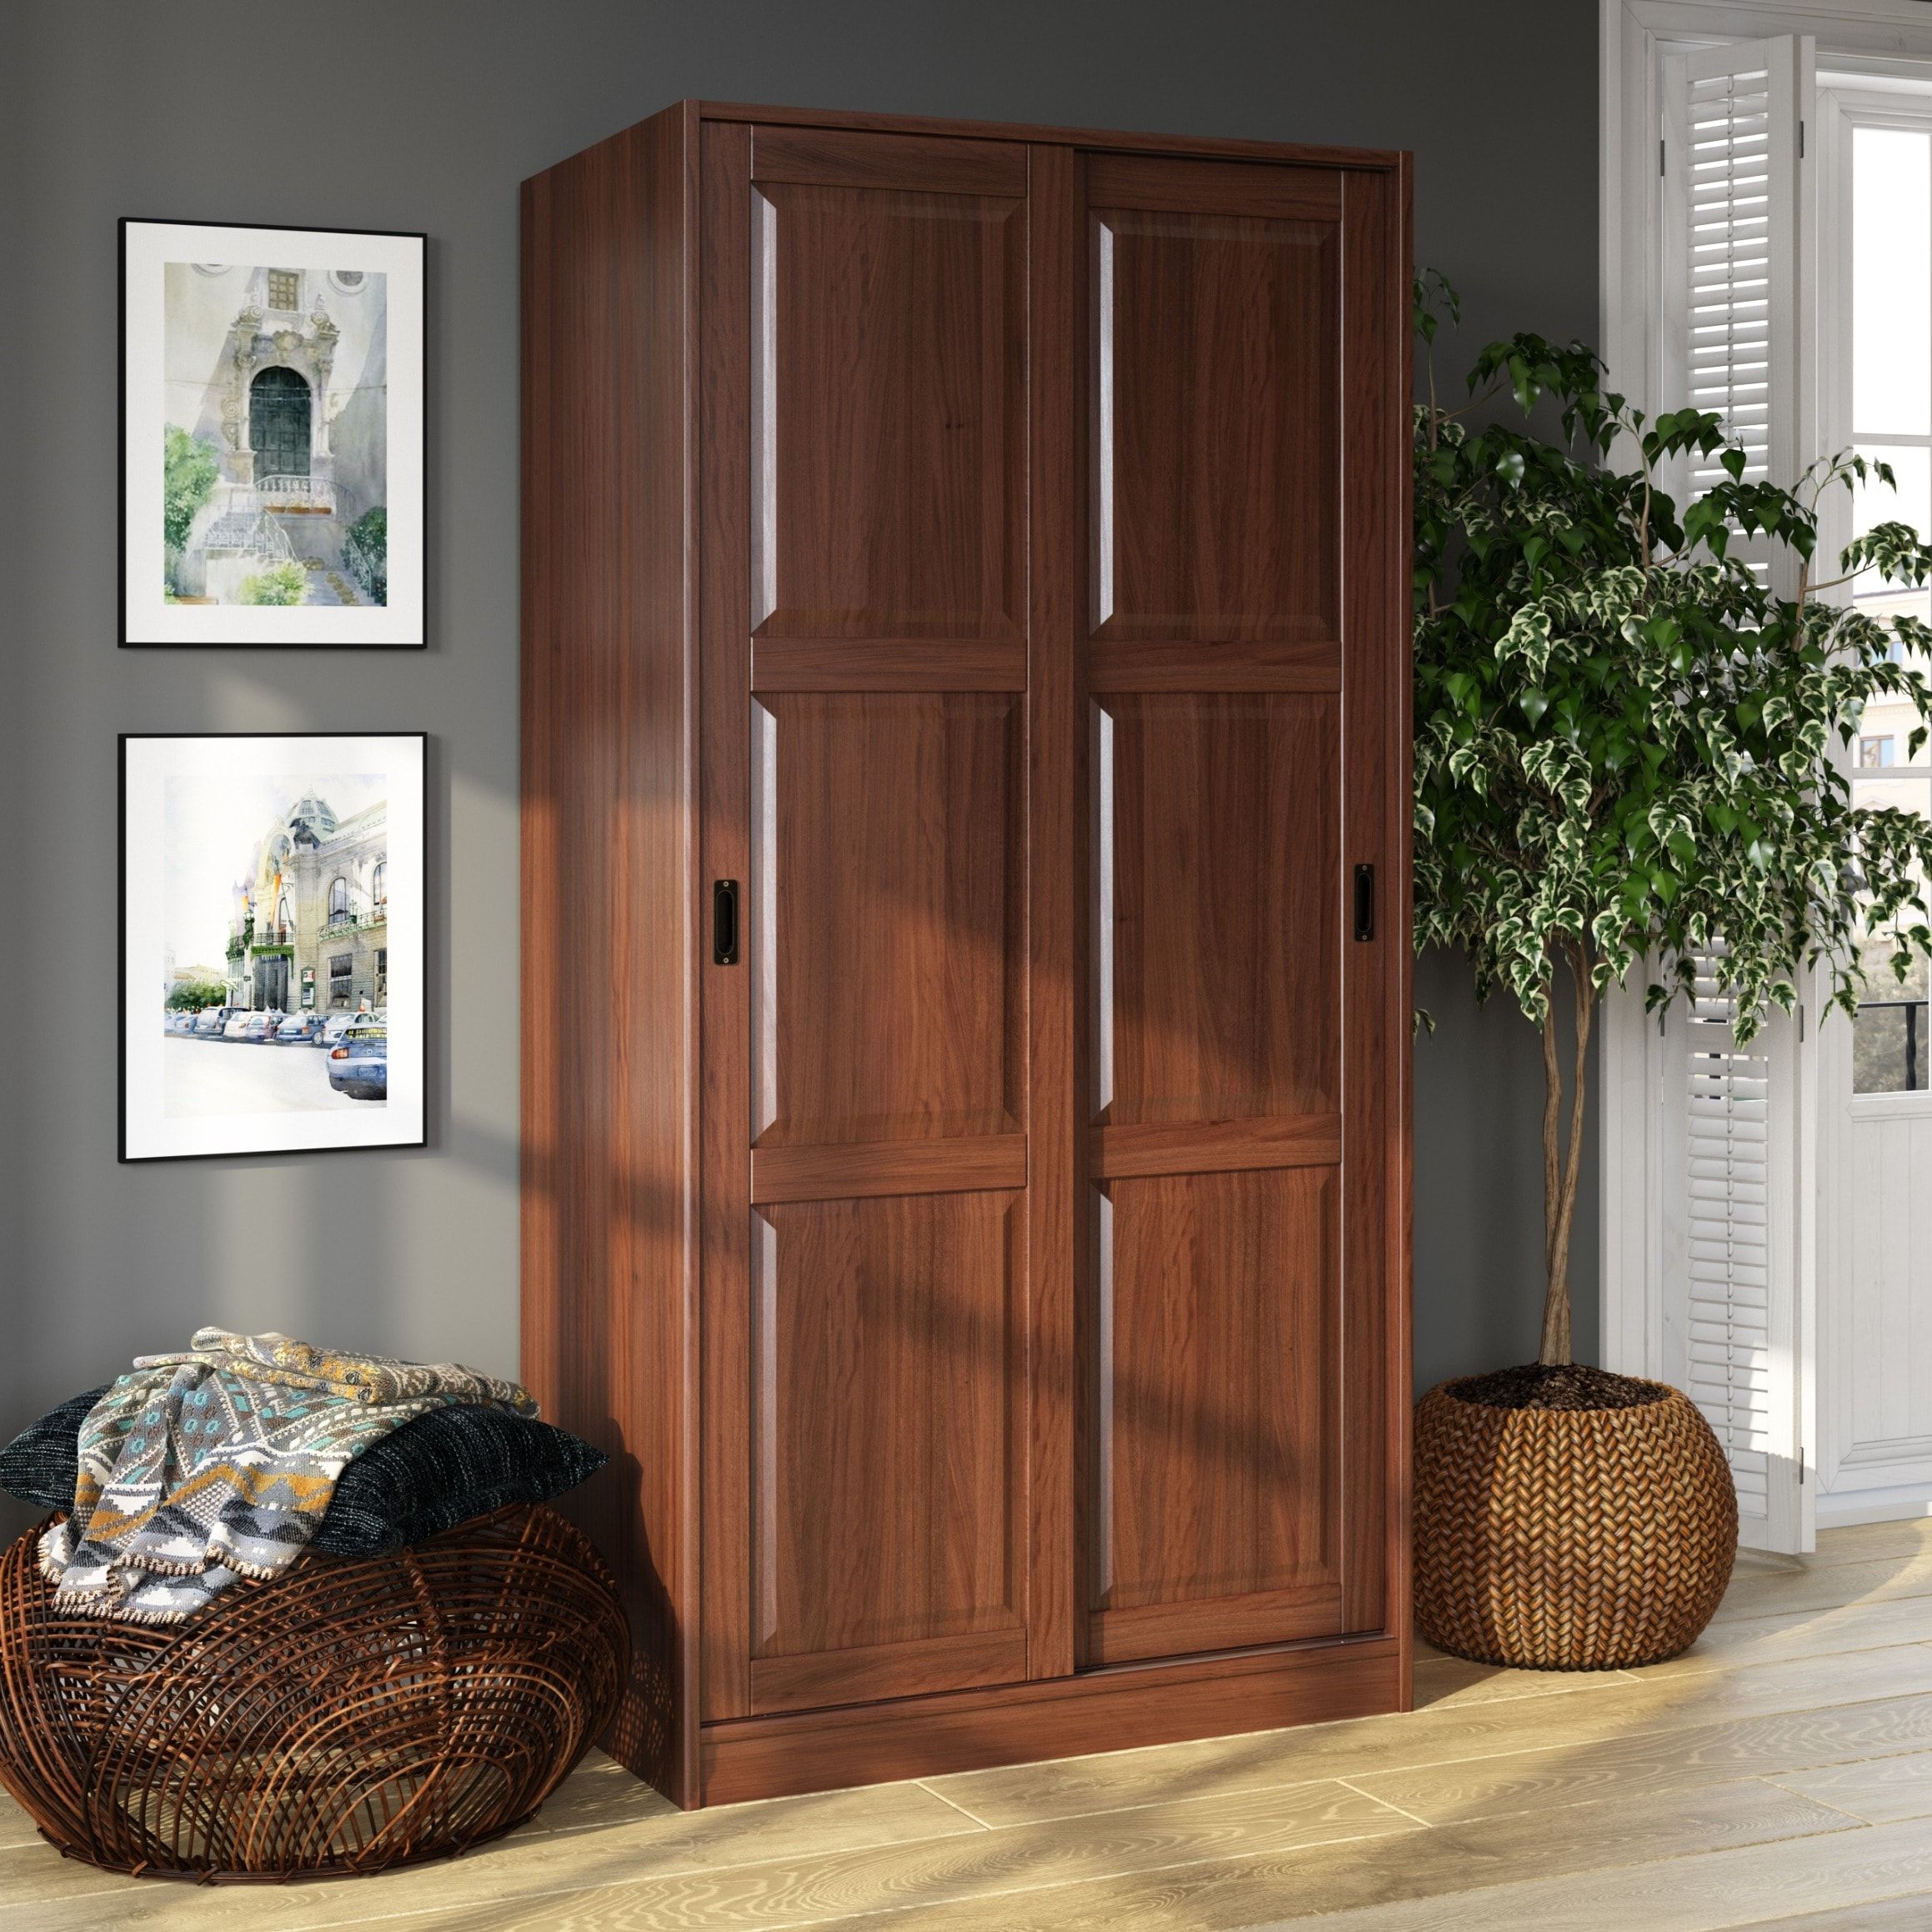 Palace Imports 100% Solid Wood 2 Sliding Door Wardrobe Armoire With  Mirrored, Closed Louvered Or Raised Panel Doors – Bed Bath & Beyond –  20000830 In Cheap Solid Wood Wardrobes (View 10 of 11)